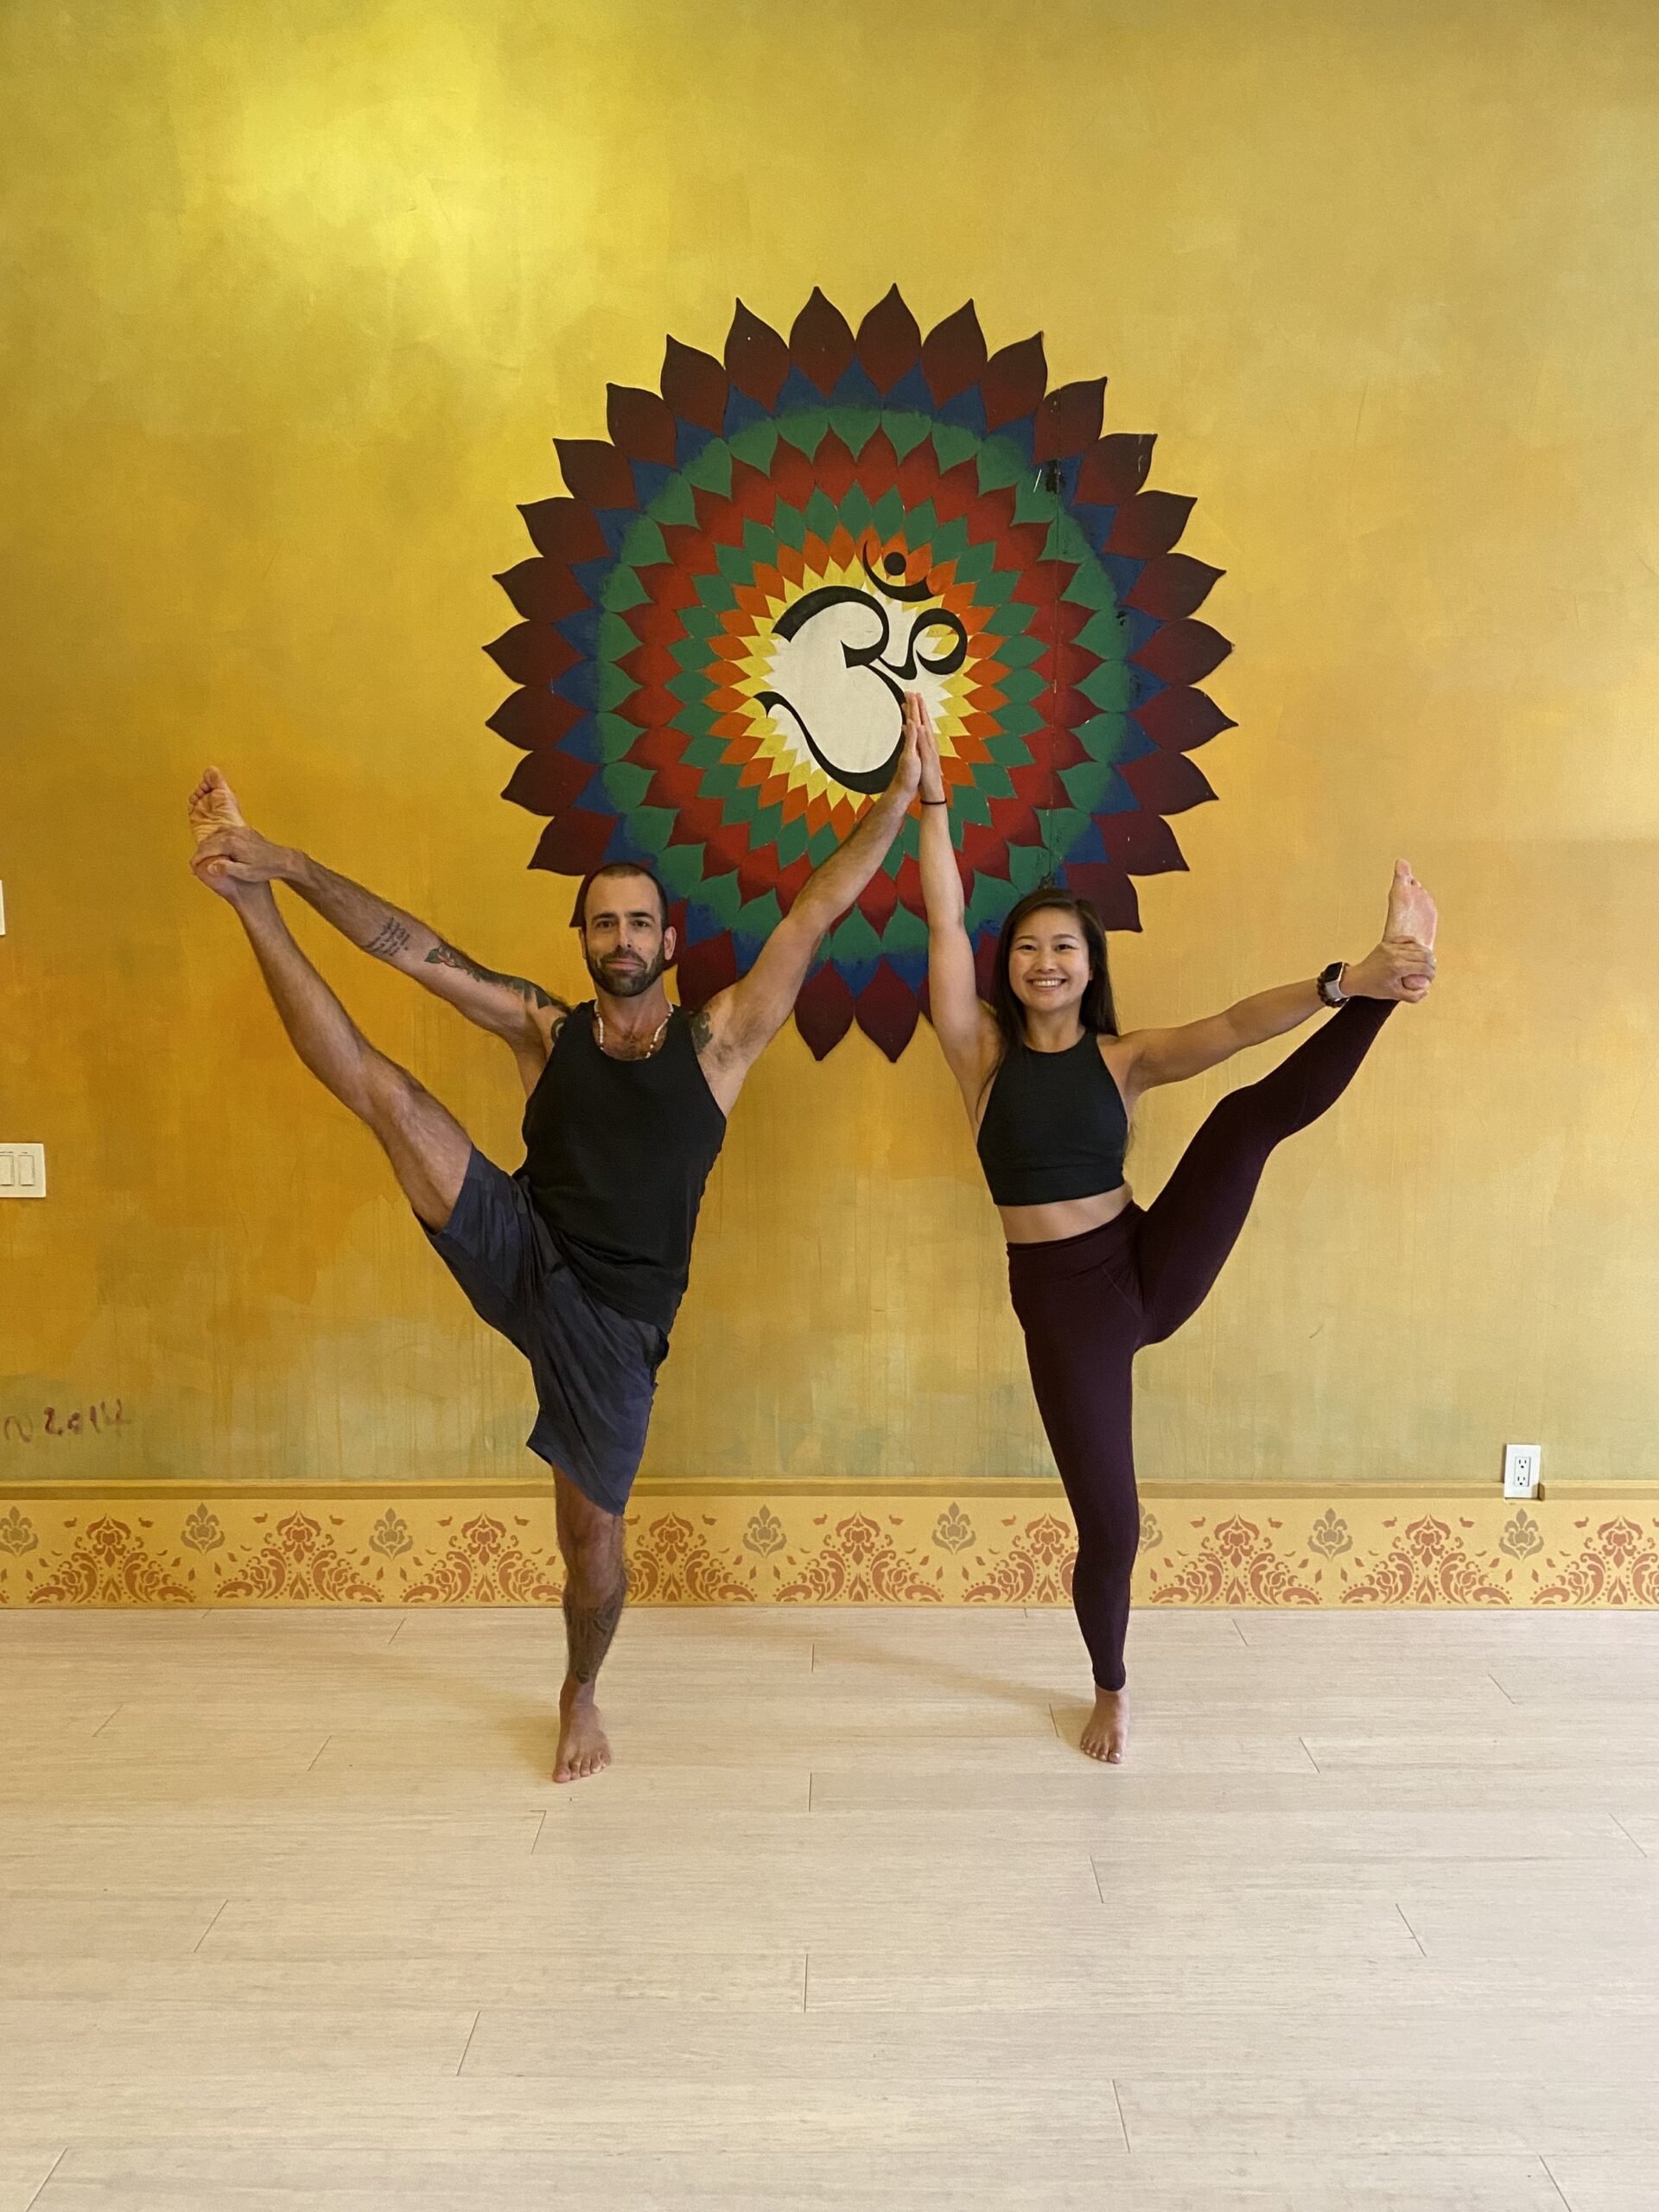 Jerome Burdi and Jessica Hwang holding ballet pose in from of vibrant om symbol